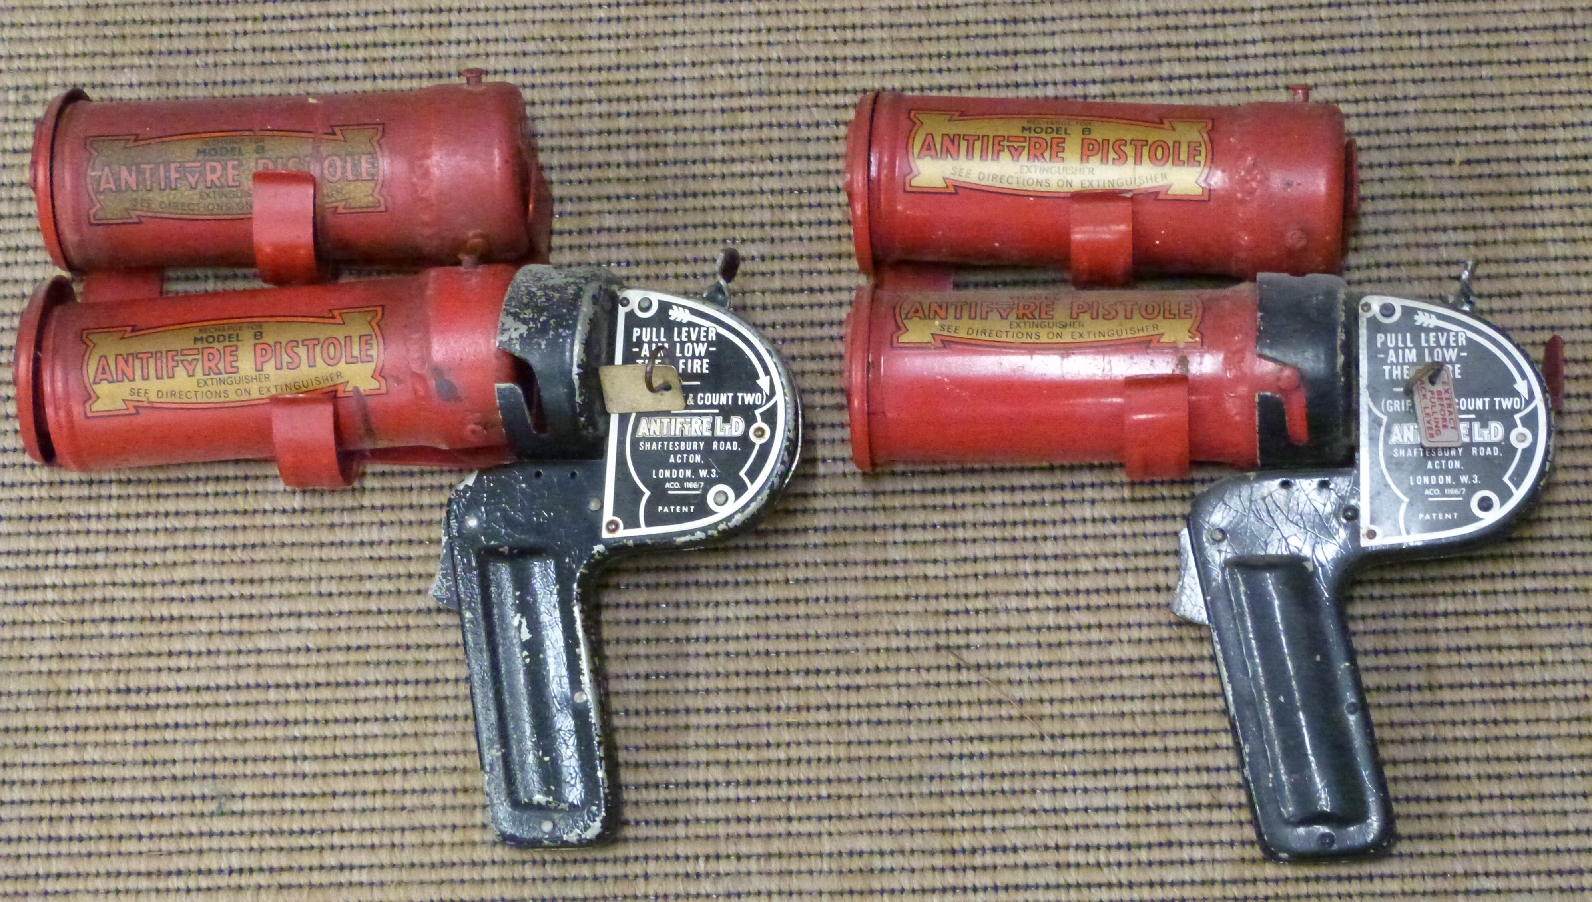 Four 'AntiFyre' model B Fire pistol extinguishers, two with trigger attachments, with wall brackets